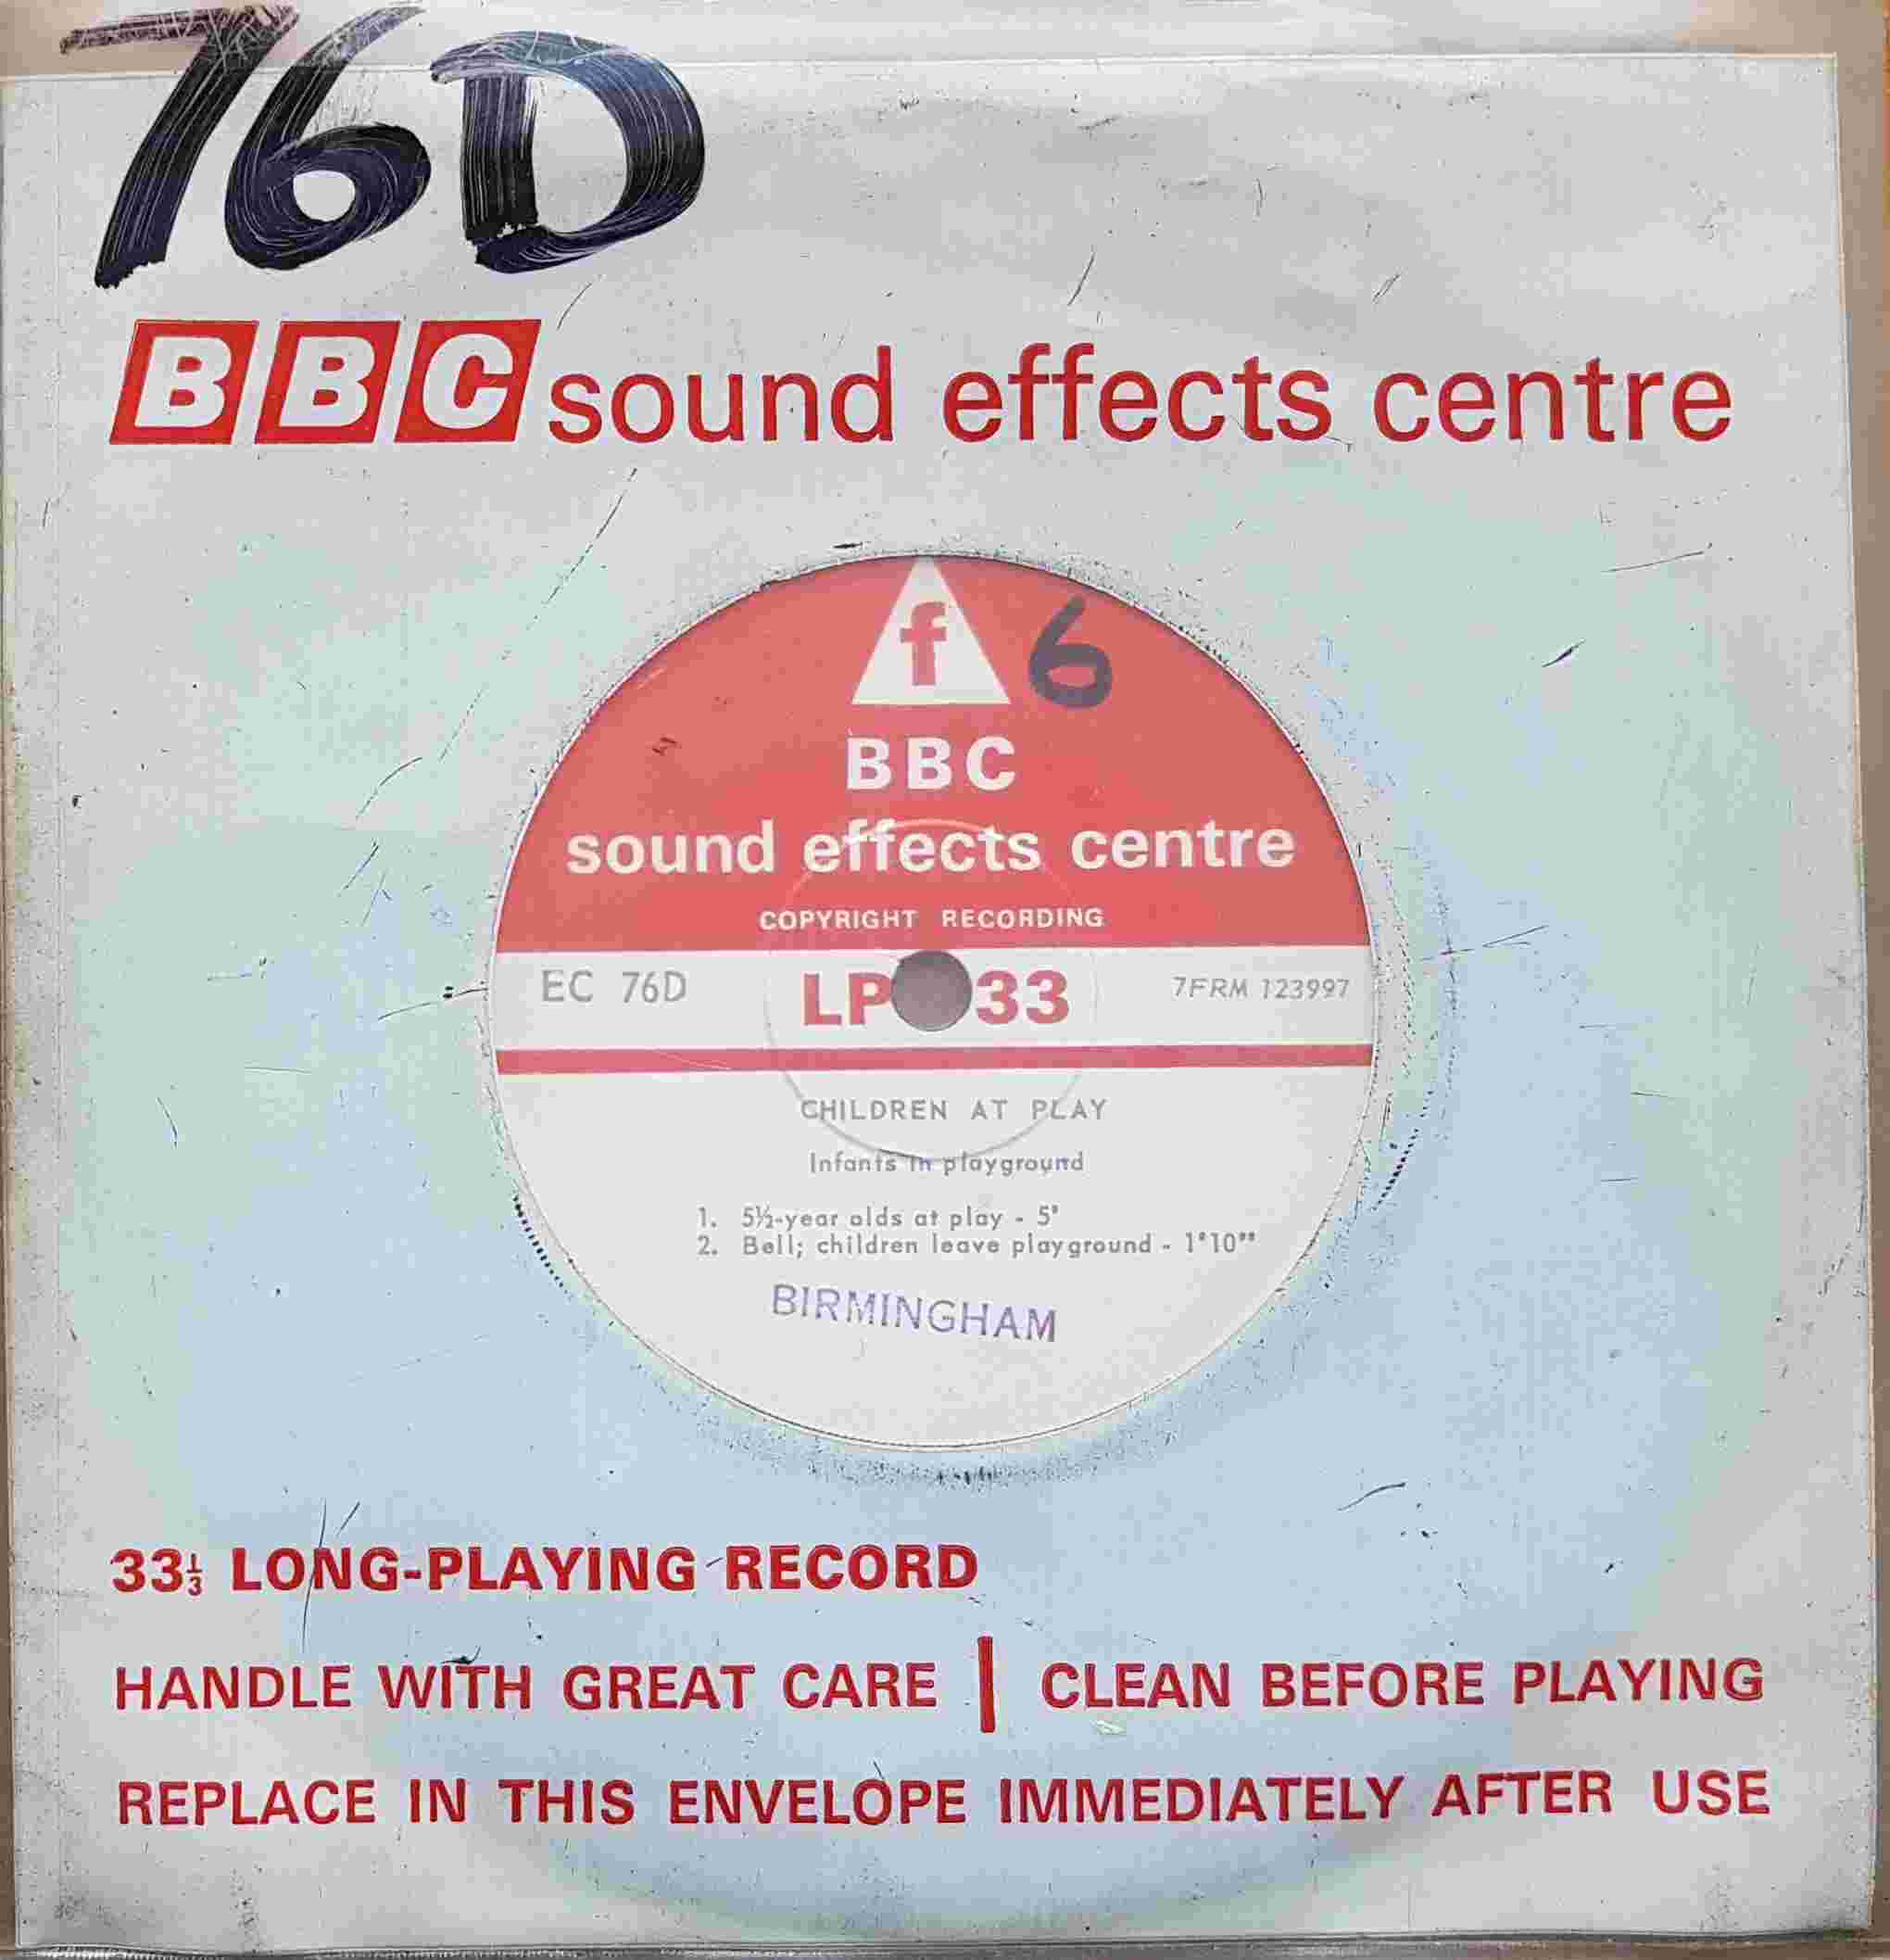 Picture of EC 76D Children at play by artist Not registered from the BBC singles - Records and Tapes library